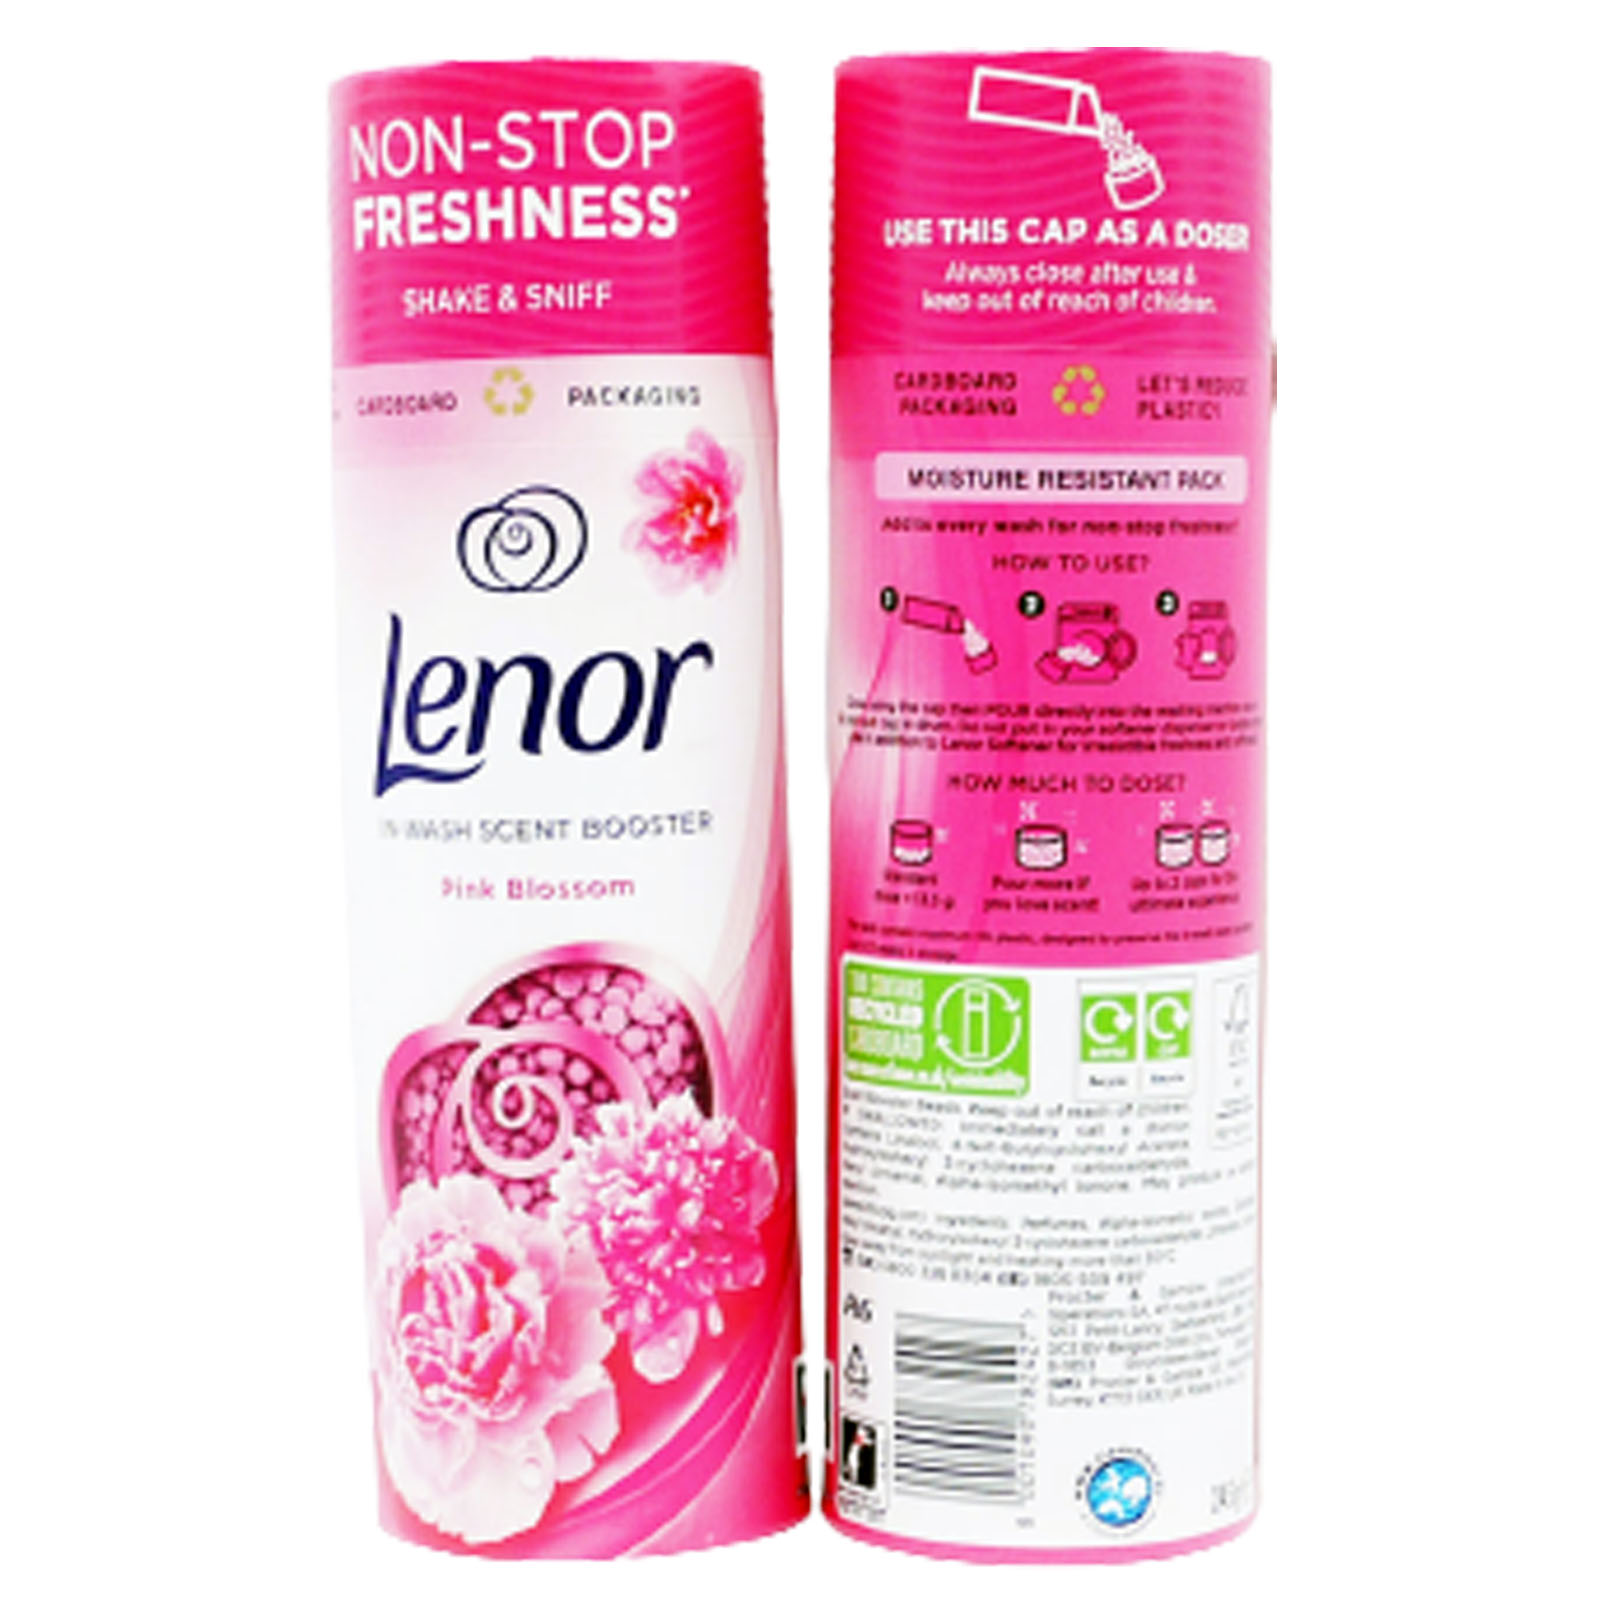 Lenor Scent Booster Pink Blossom 245g